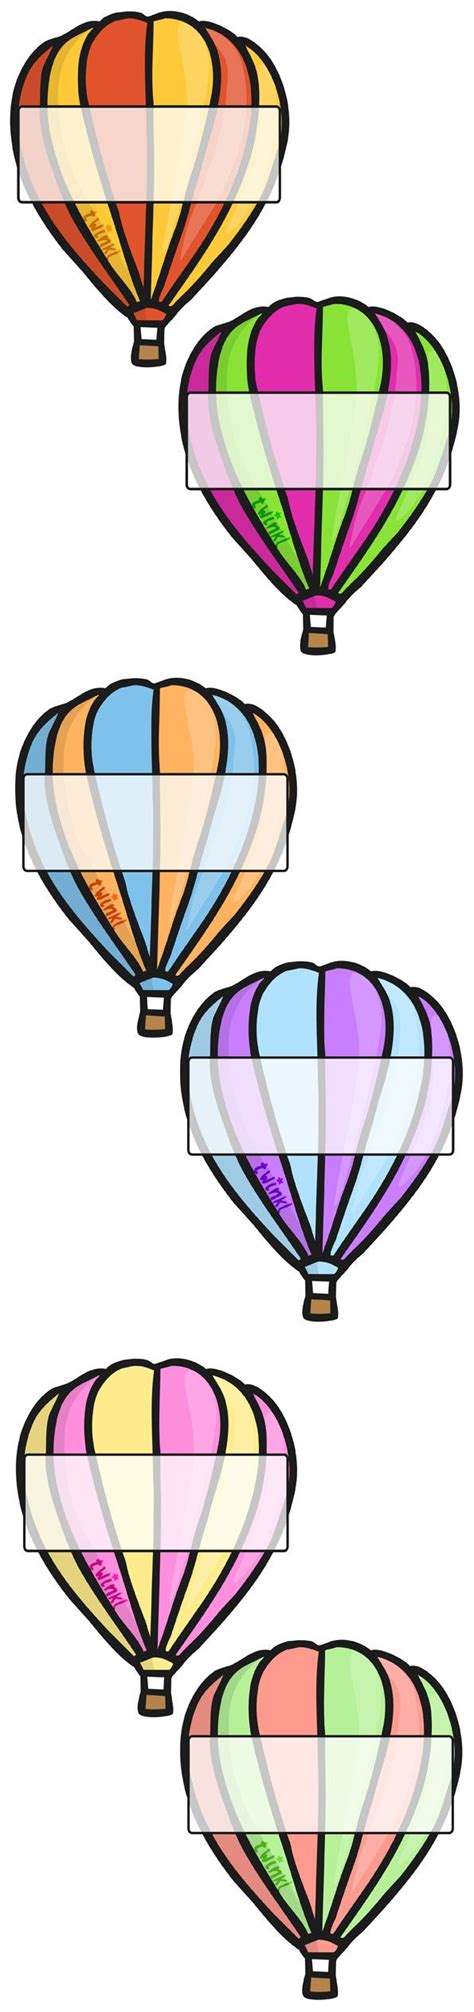 Applique templates templates printable free applique patterns craft patterns free printables balloon ribbon balloon crafts balloon template hot air. 80 best Class Labels and Signs images on Pinterest